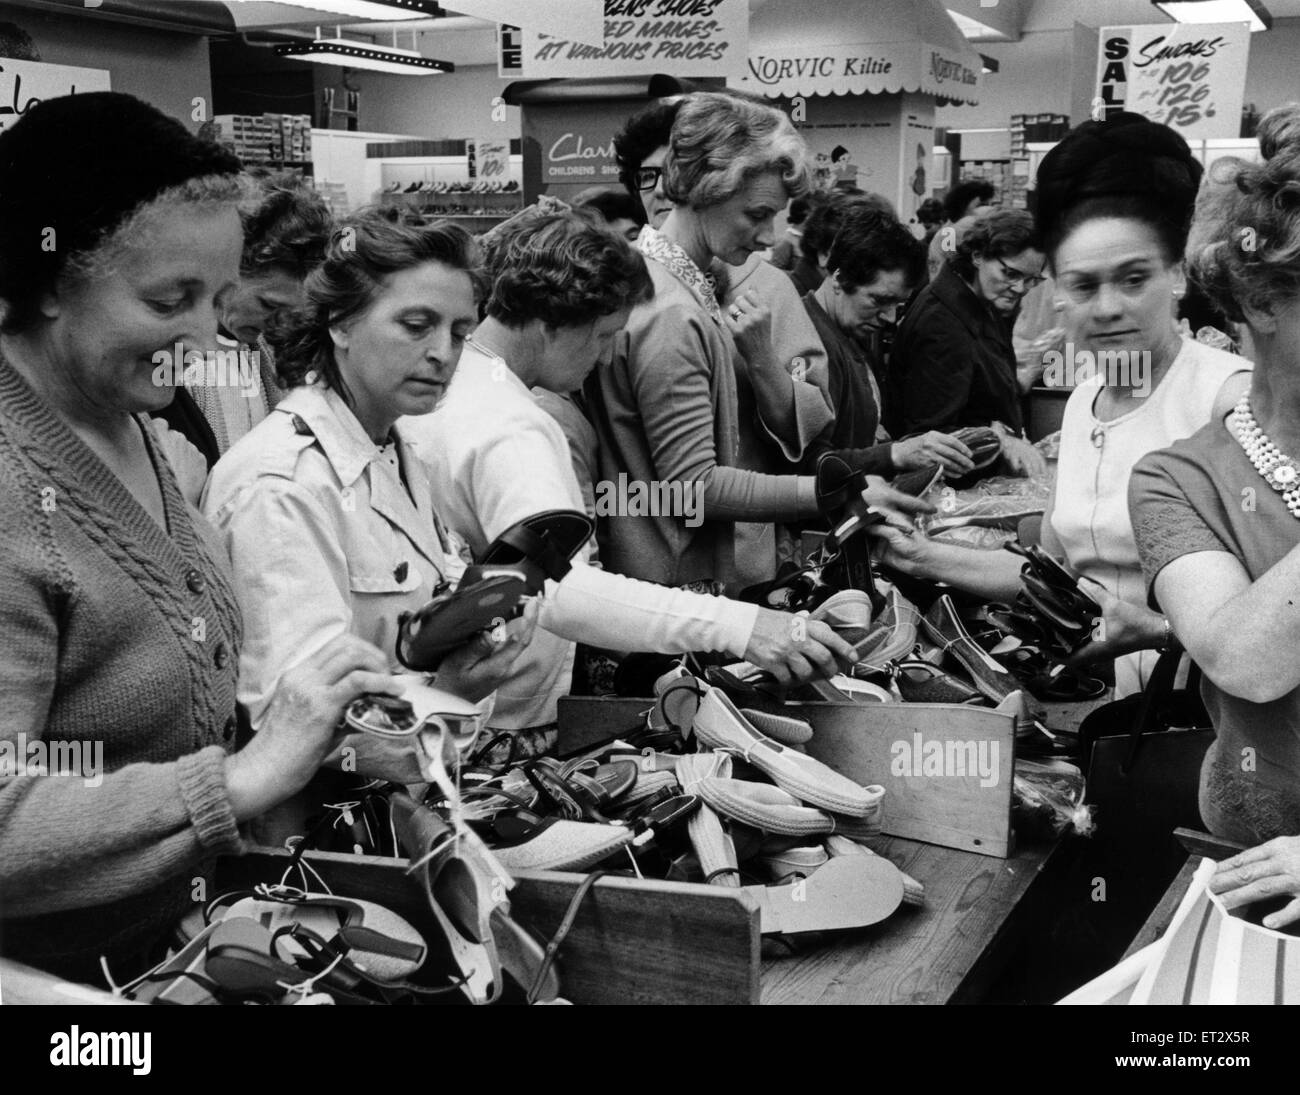 Birmingham Shopping Series.  Customers looking at shoes on sale in Clark's shoe shop. Birmingham. June 1968. Stock Photo